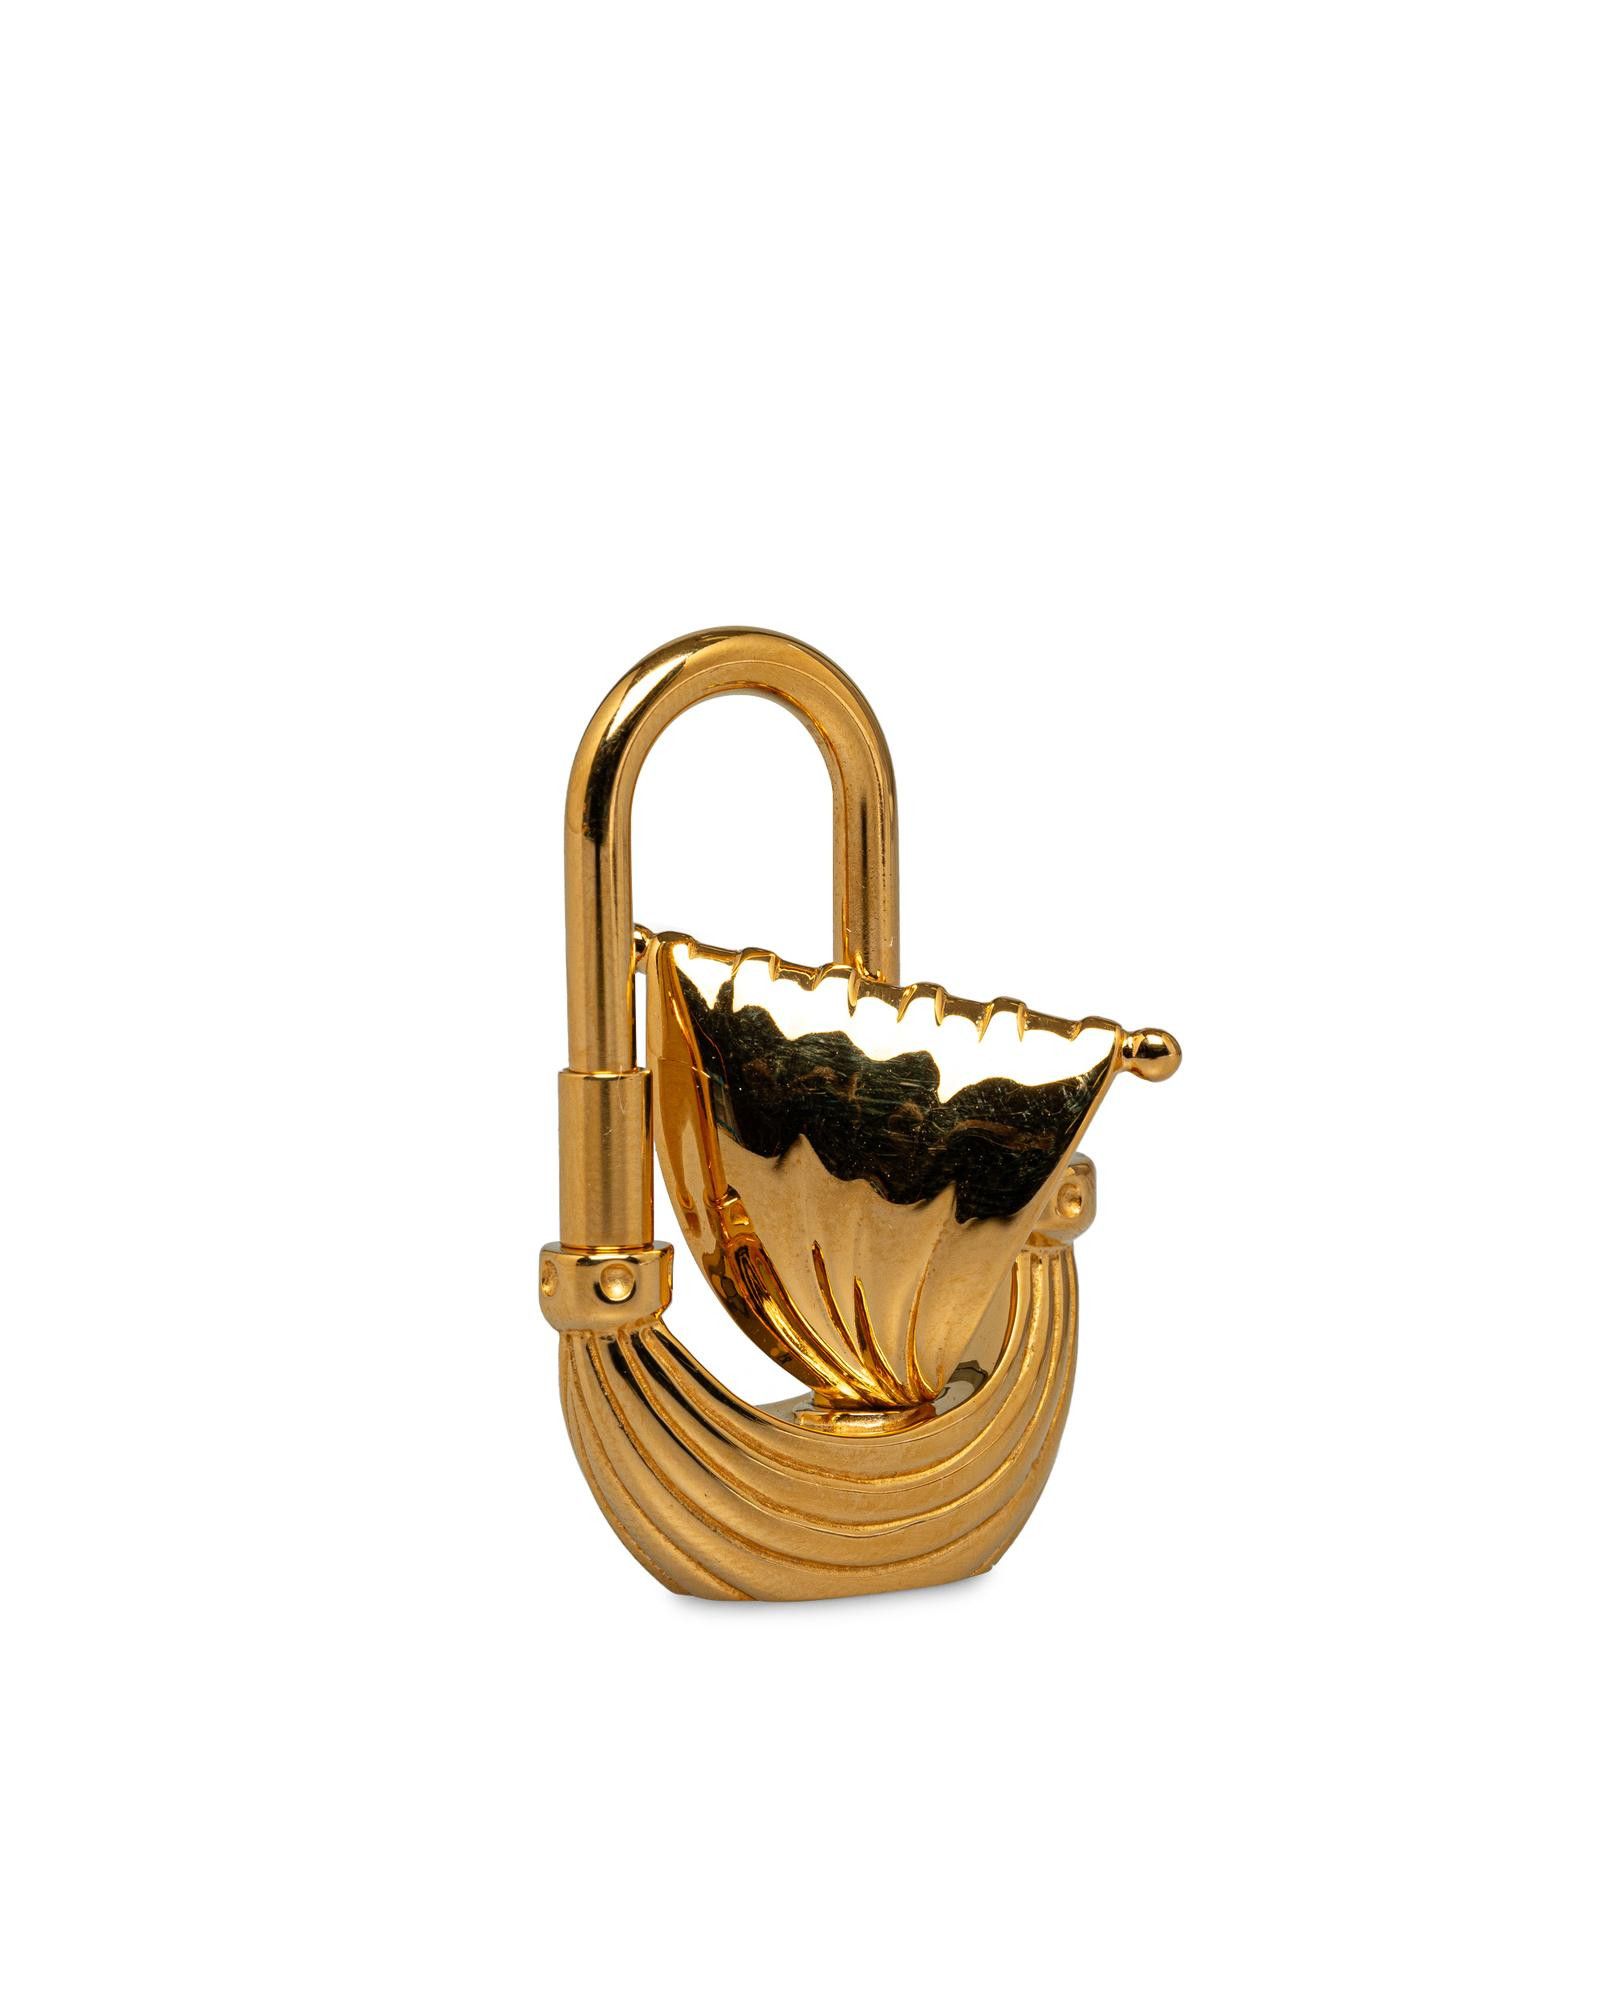 image of Hermes Sailing Boat Cadena Lock Charm For Luxury Accessories in Gold, Women's